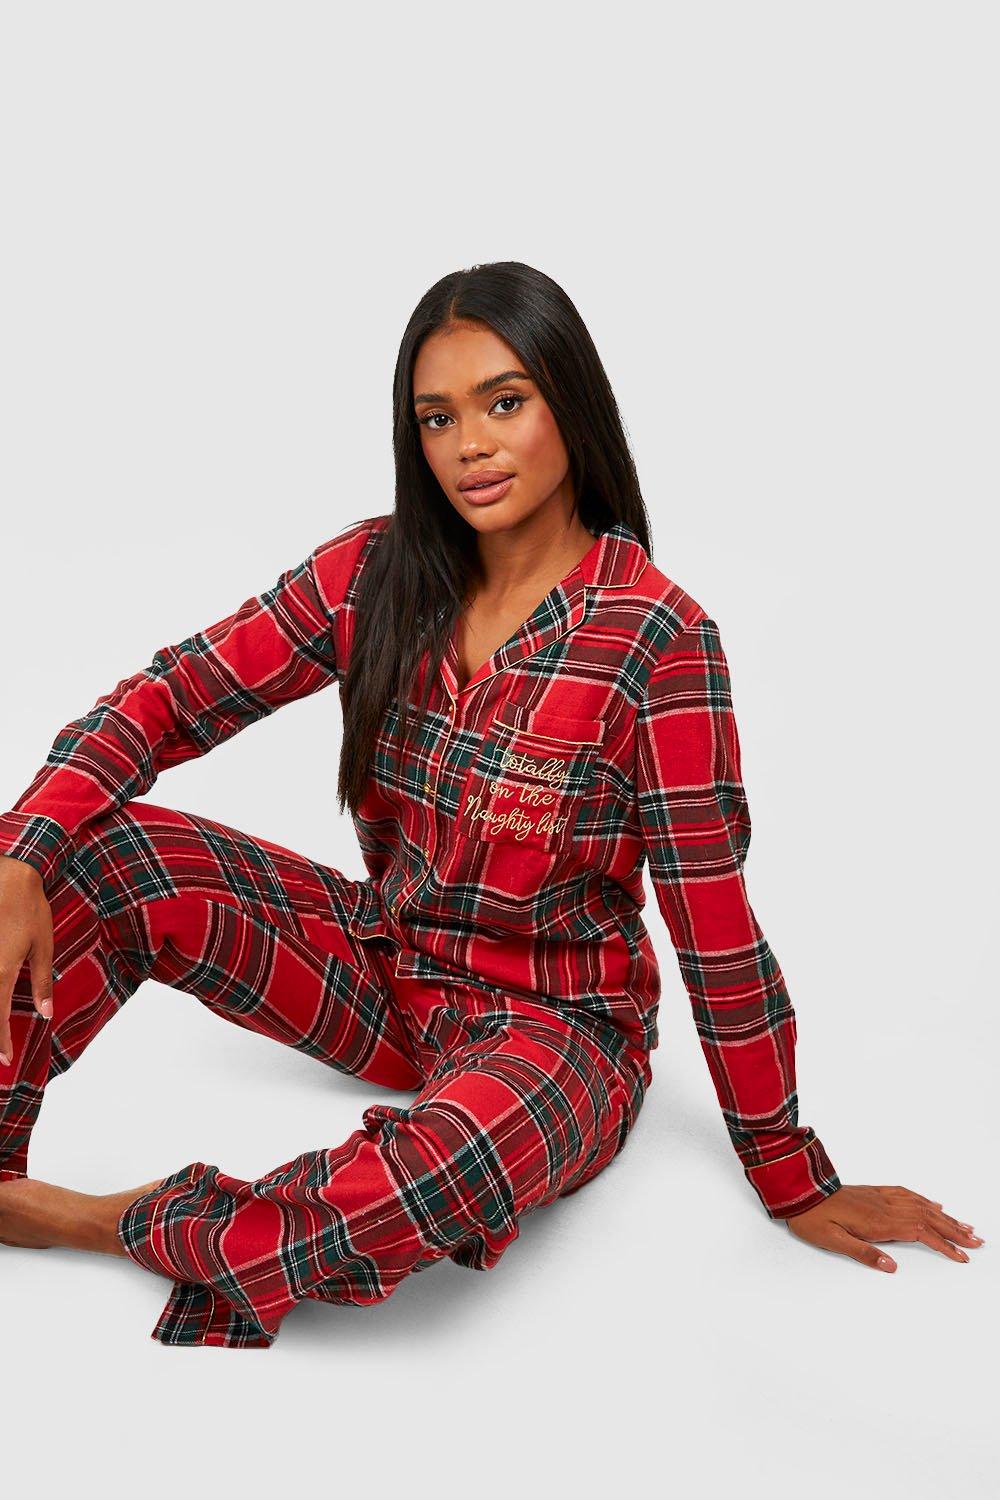 Ambrielle Red Pajama Sets for Women